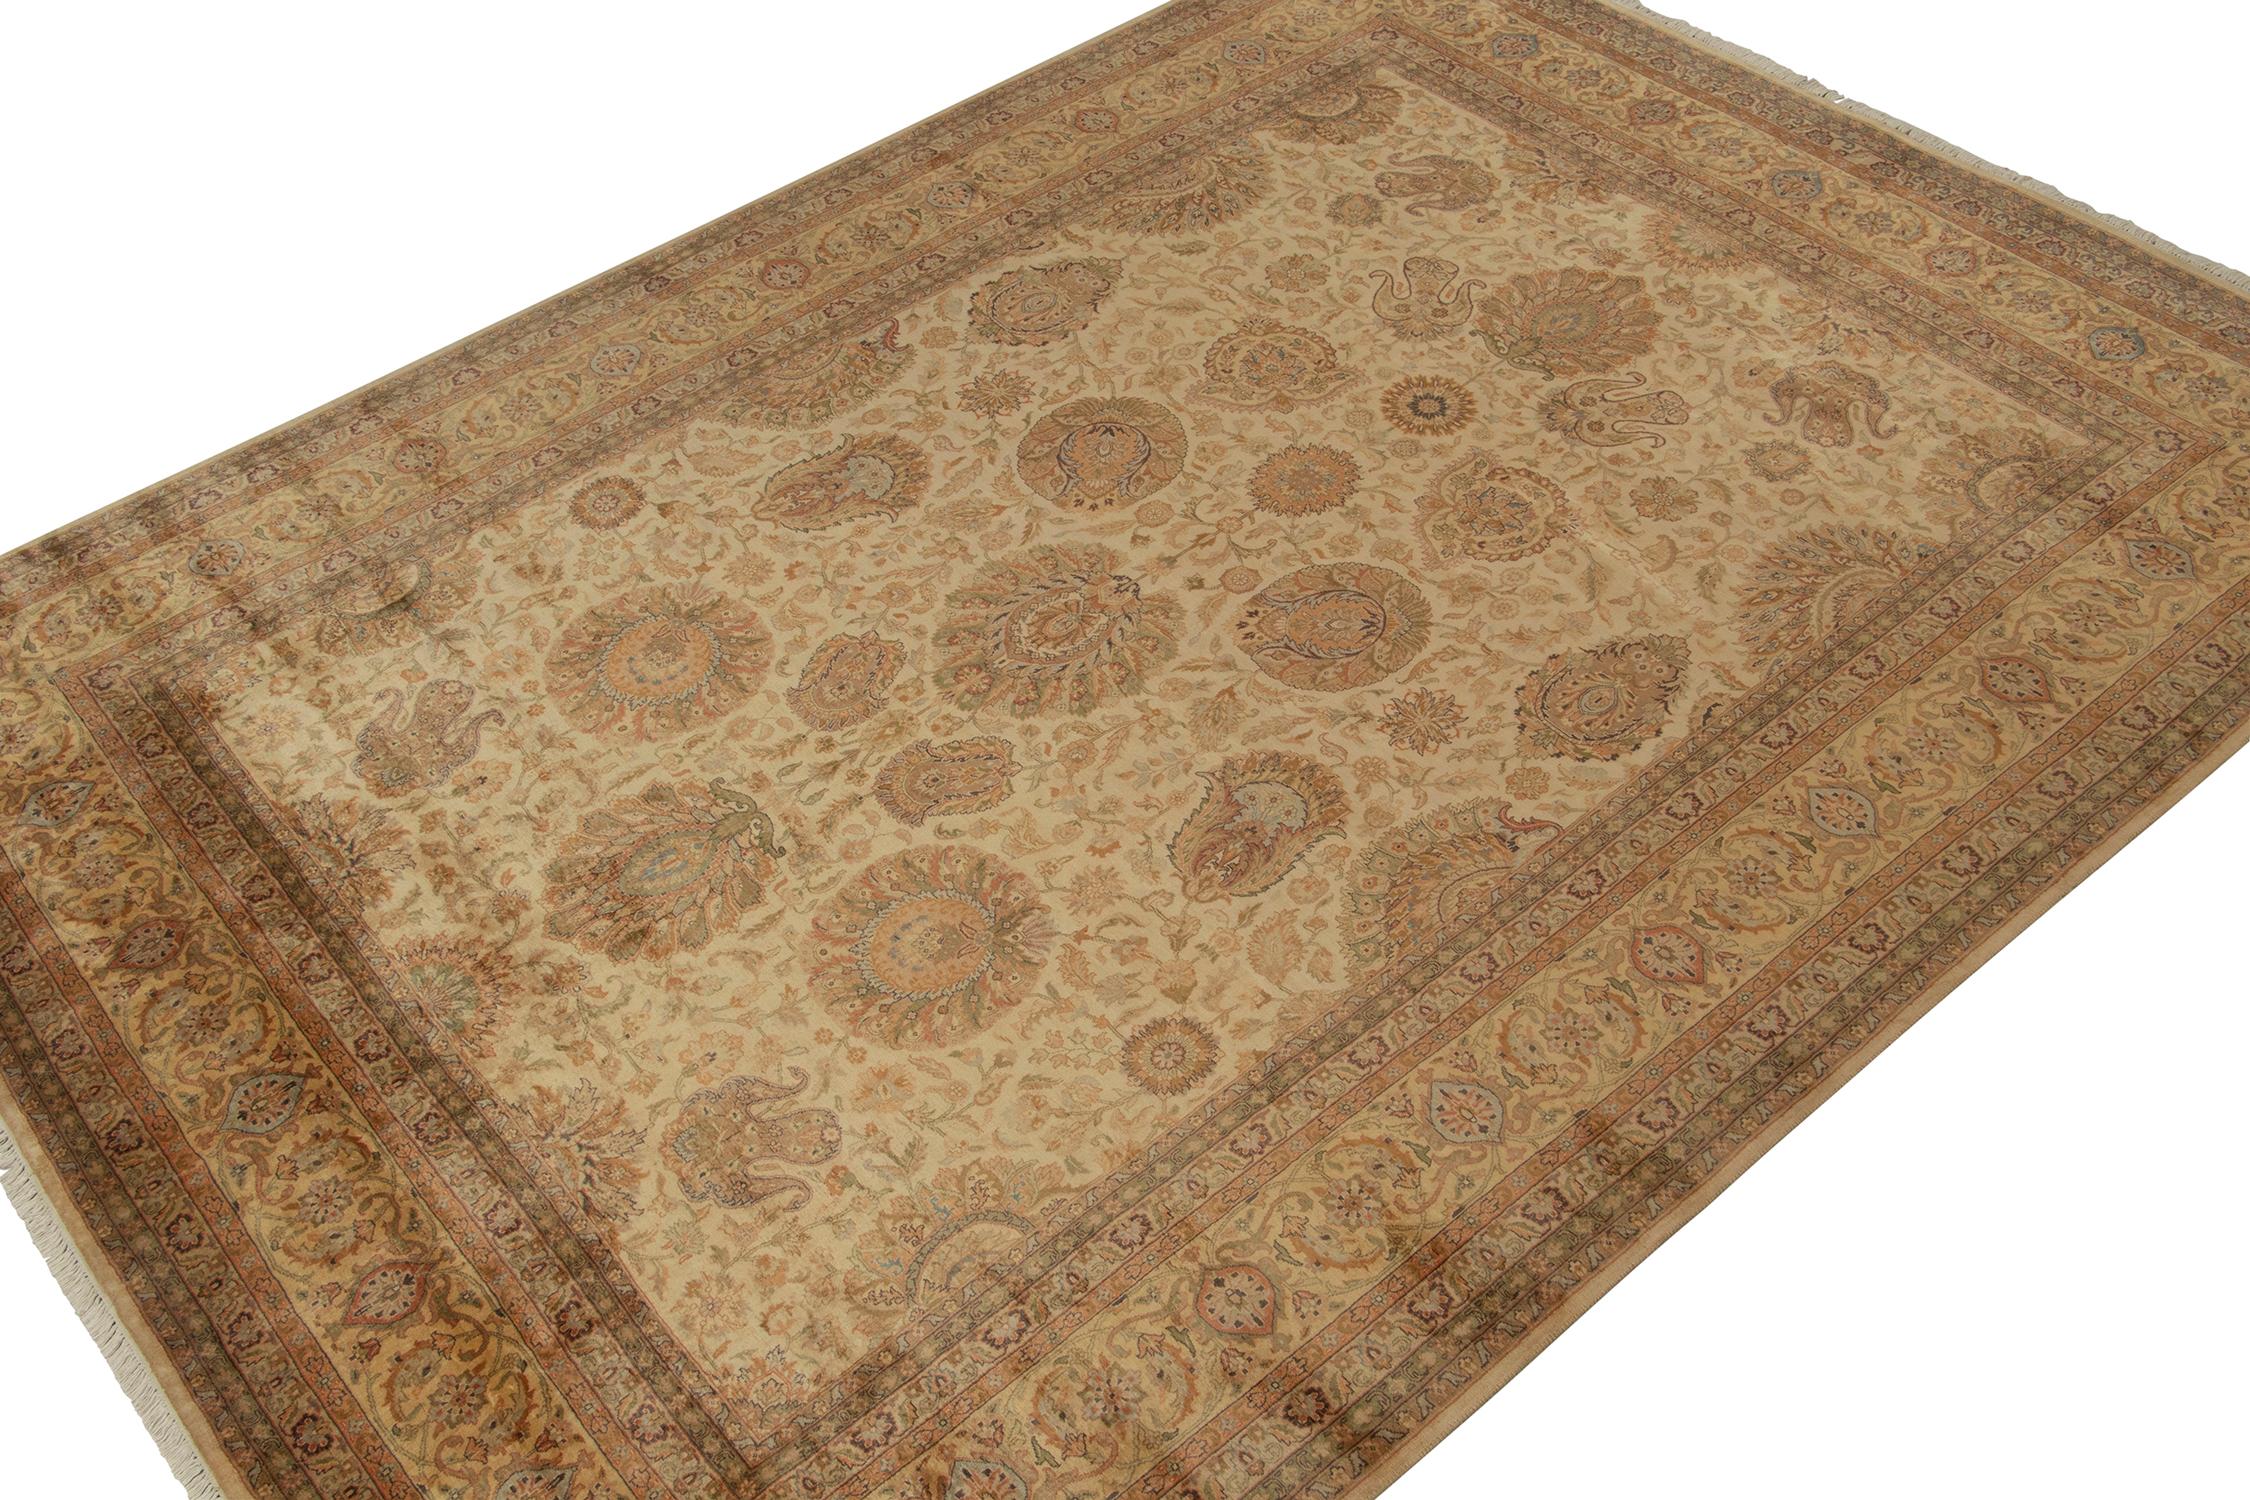 A 9x12 rug inspired from Persian rug styles, from Rug & Kilim’s Modern Classics Collection. Hand-knotted in wool, playing an exceptional gold beside beige-brown in floral patterns with classic grace.
Further On the Design:
The fine detail is a